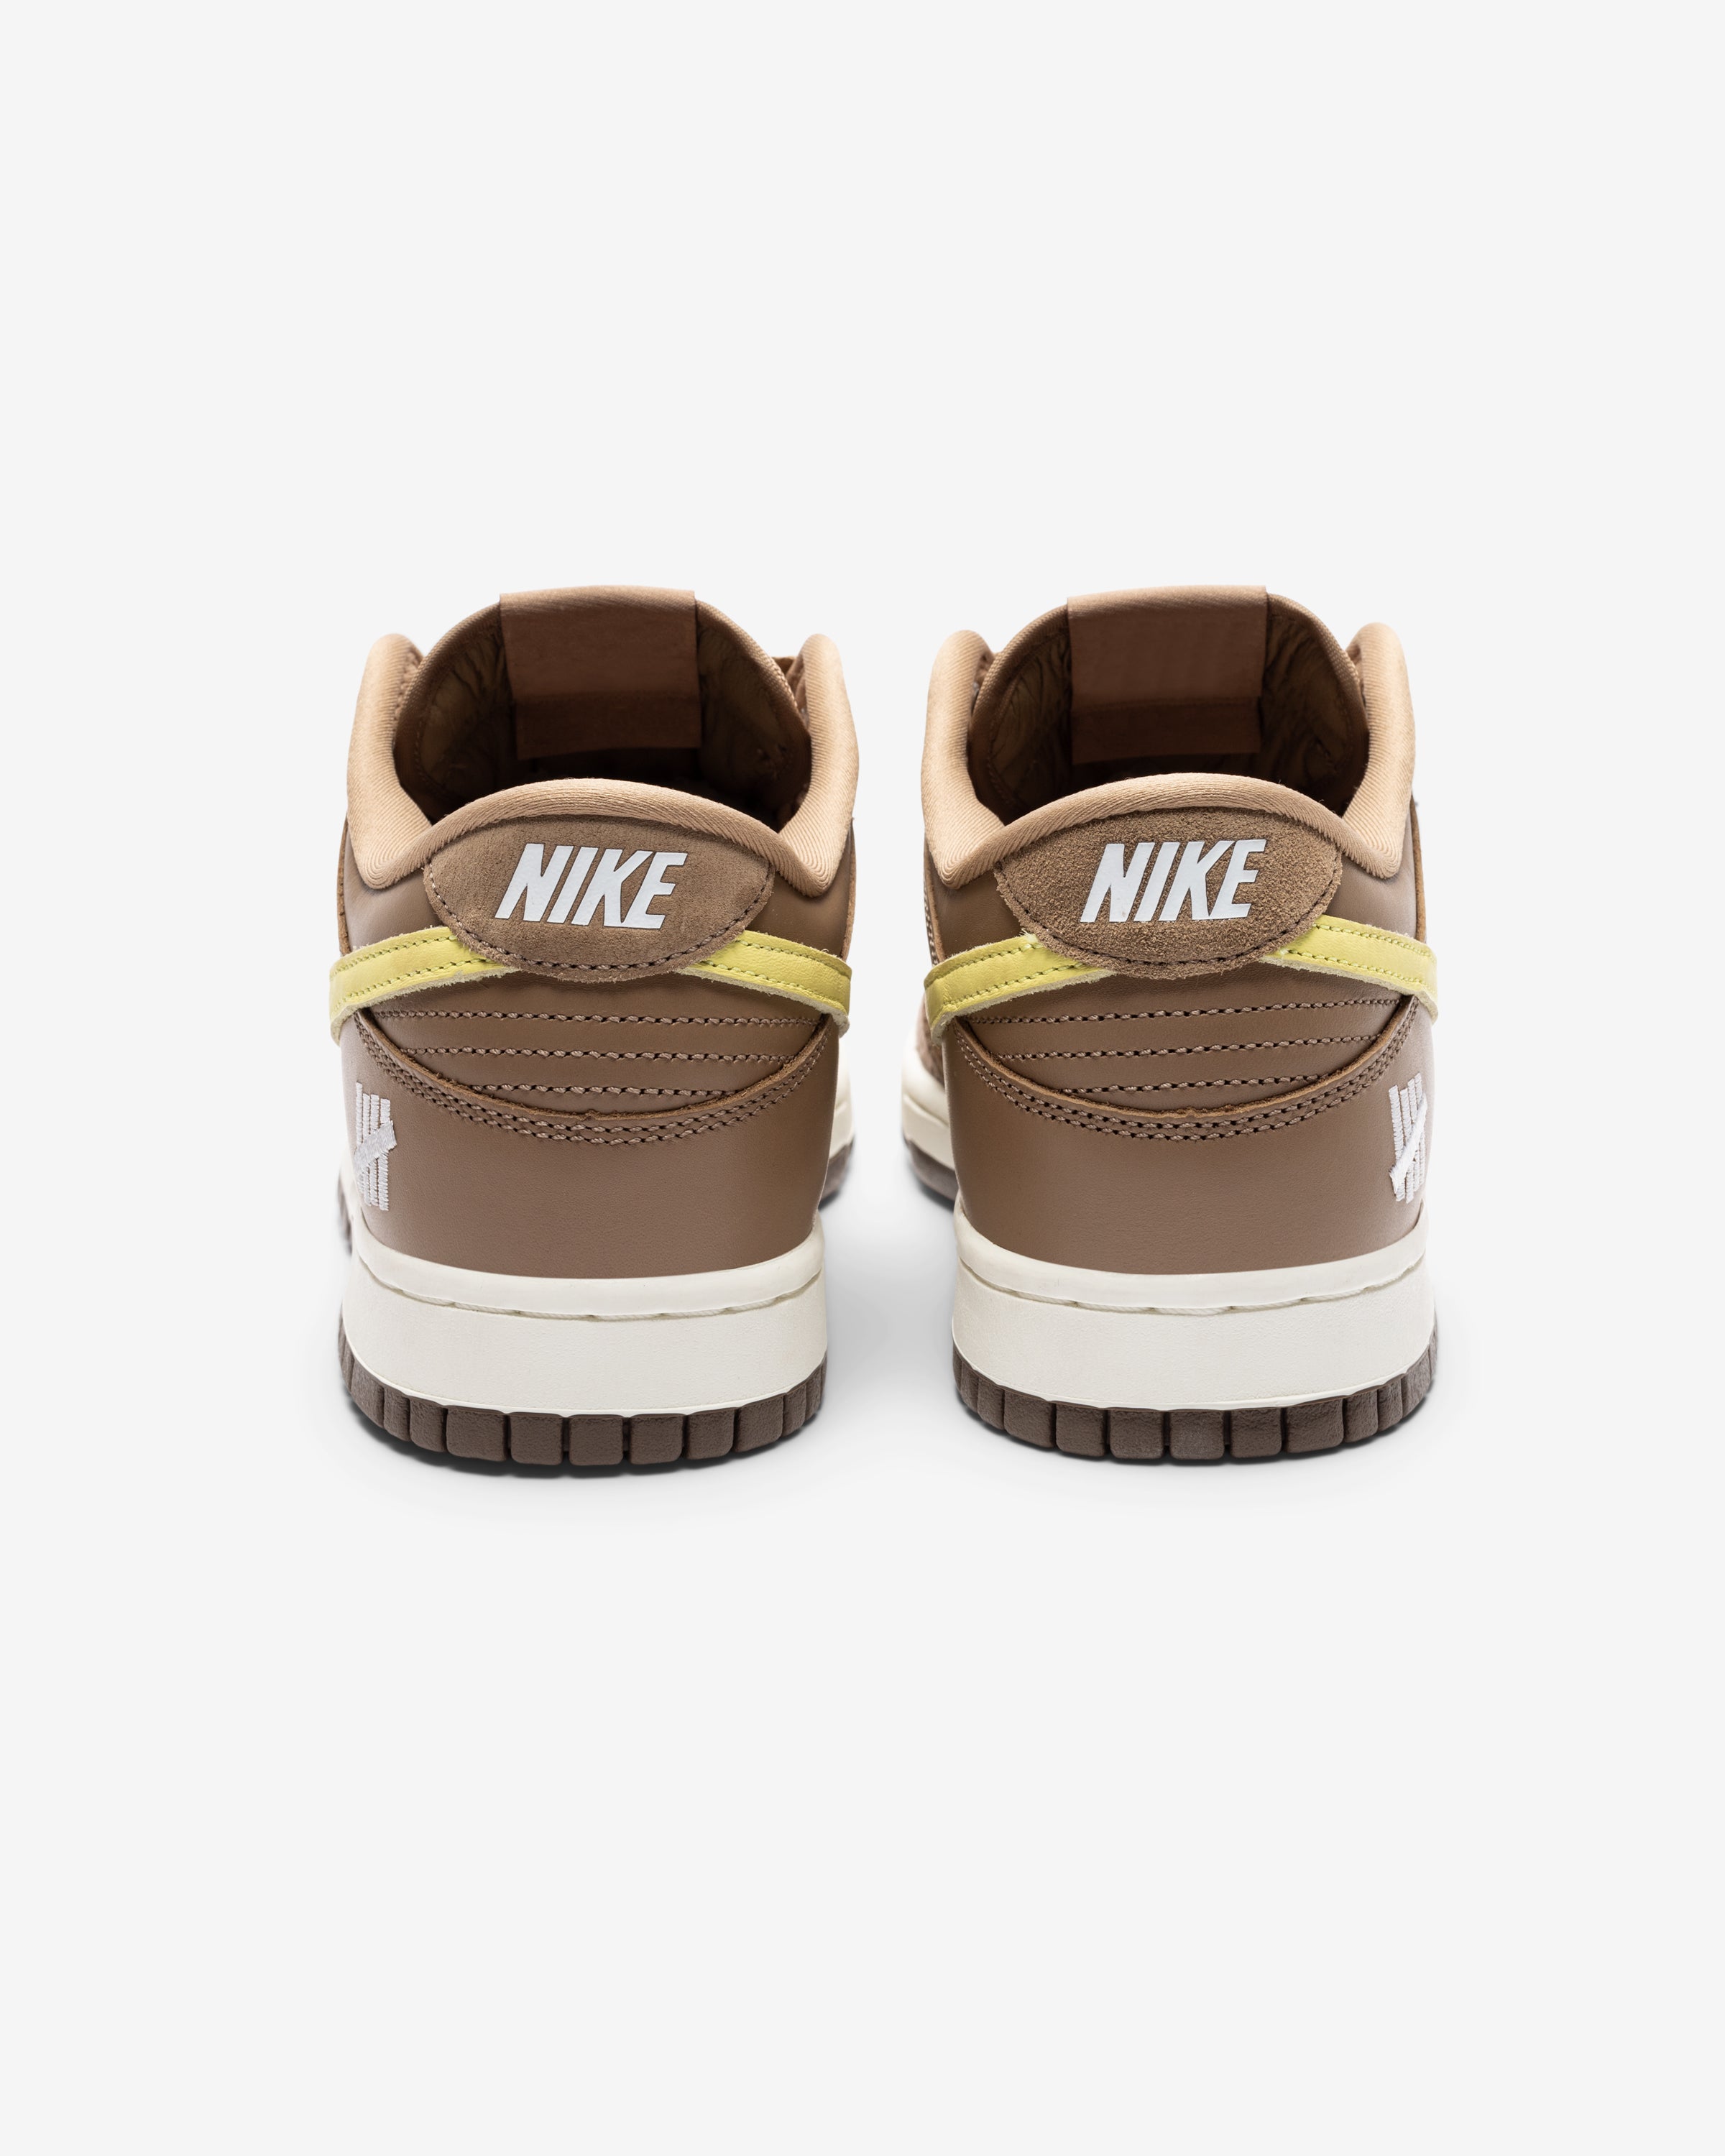 NIKE X UNDEFEATED DUNK LOW SP - CANTEEN/ LEMONFROST/ PALOMINO